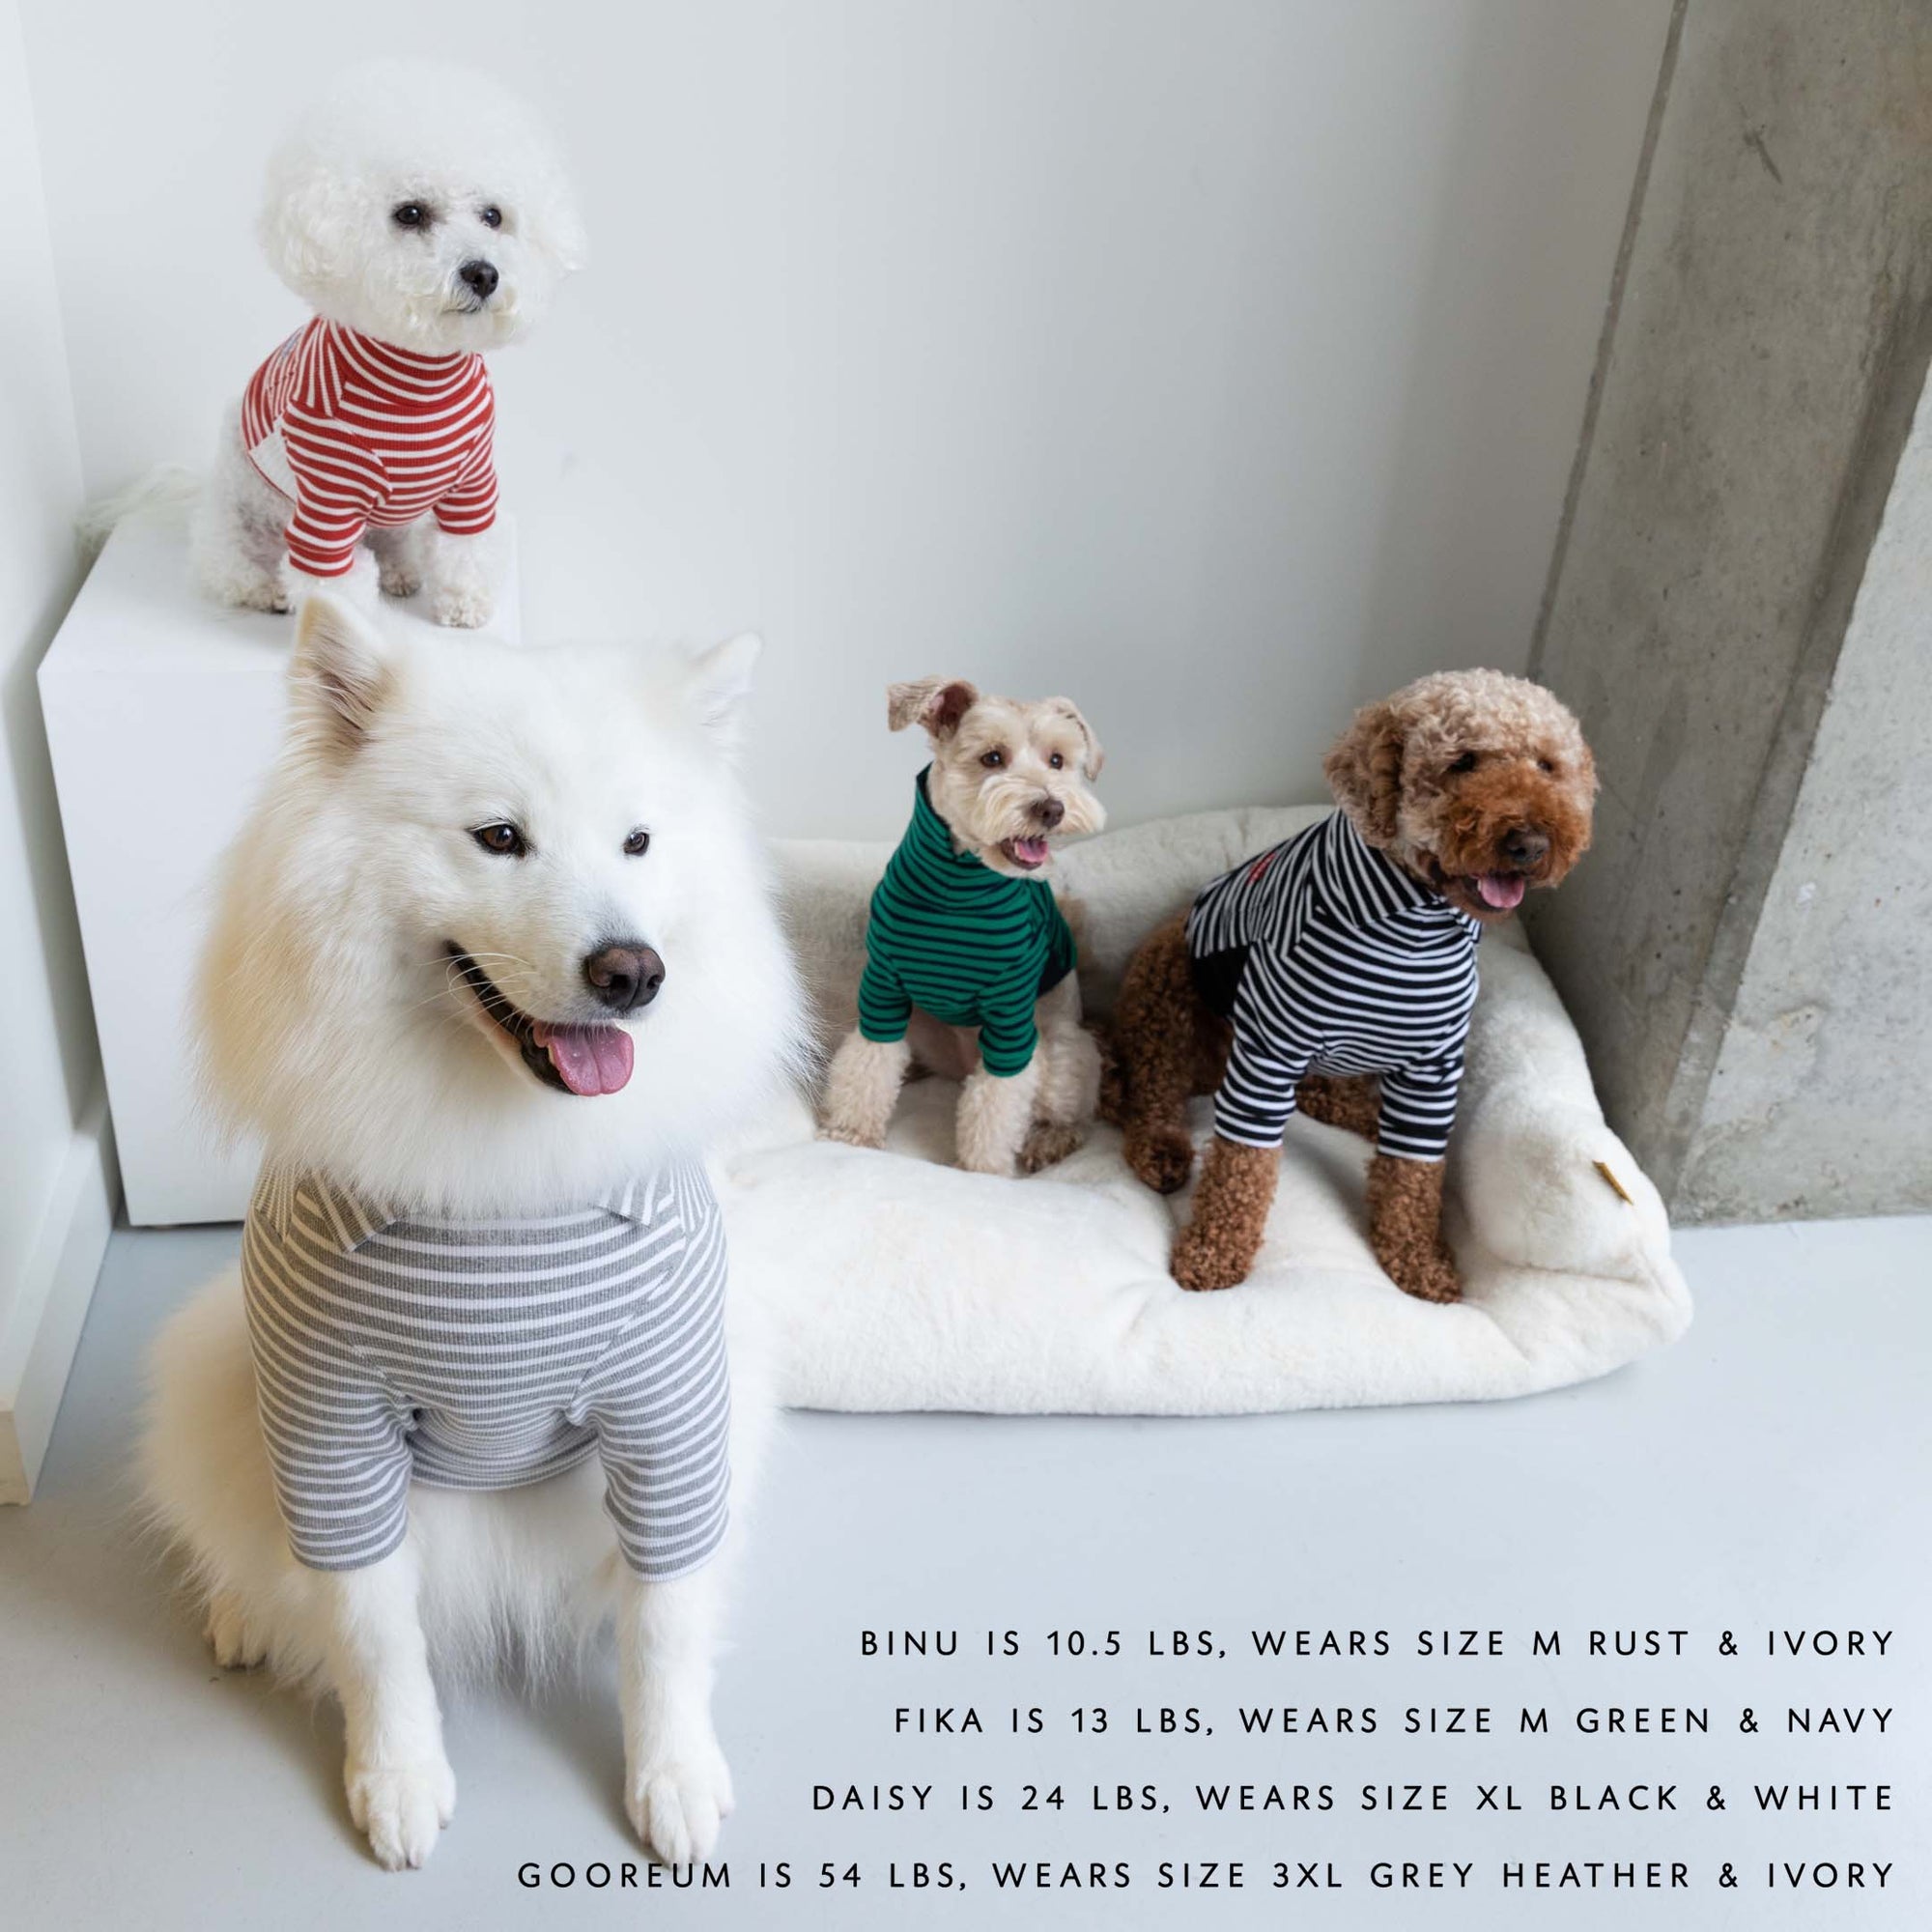 Group of dogs in colorful striped shirts, with a Samoyed in gray, a Schnauzer in green, a Poodle in black, and a Bichon in red.